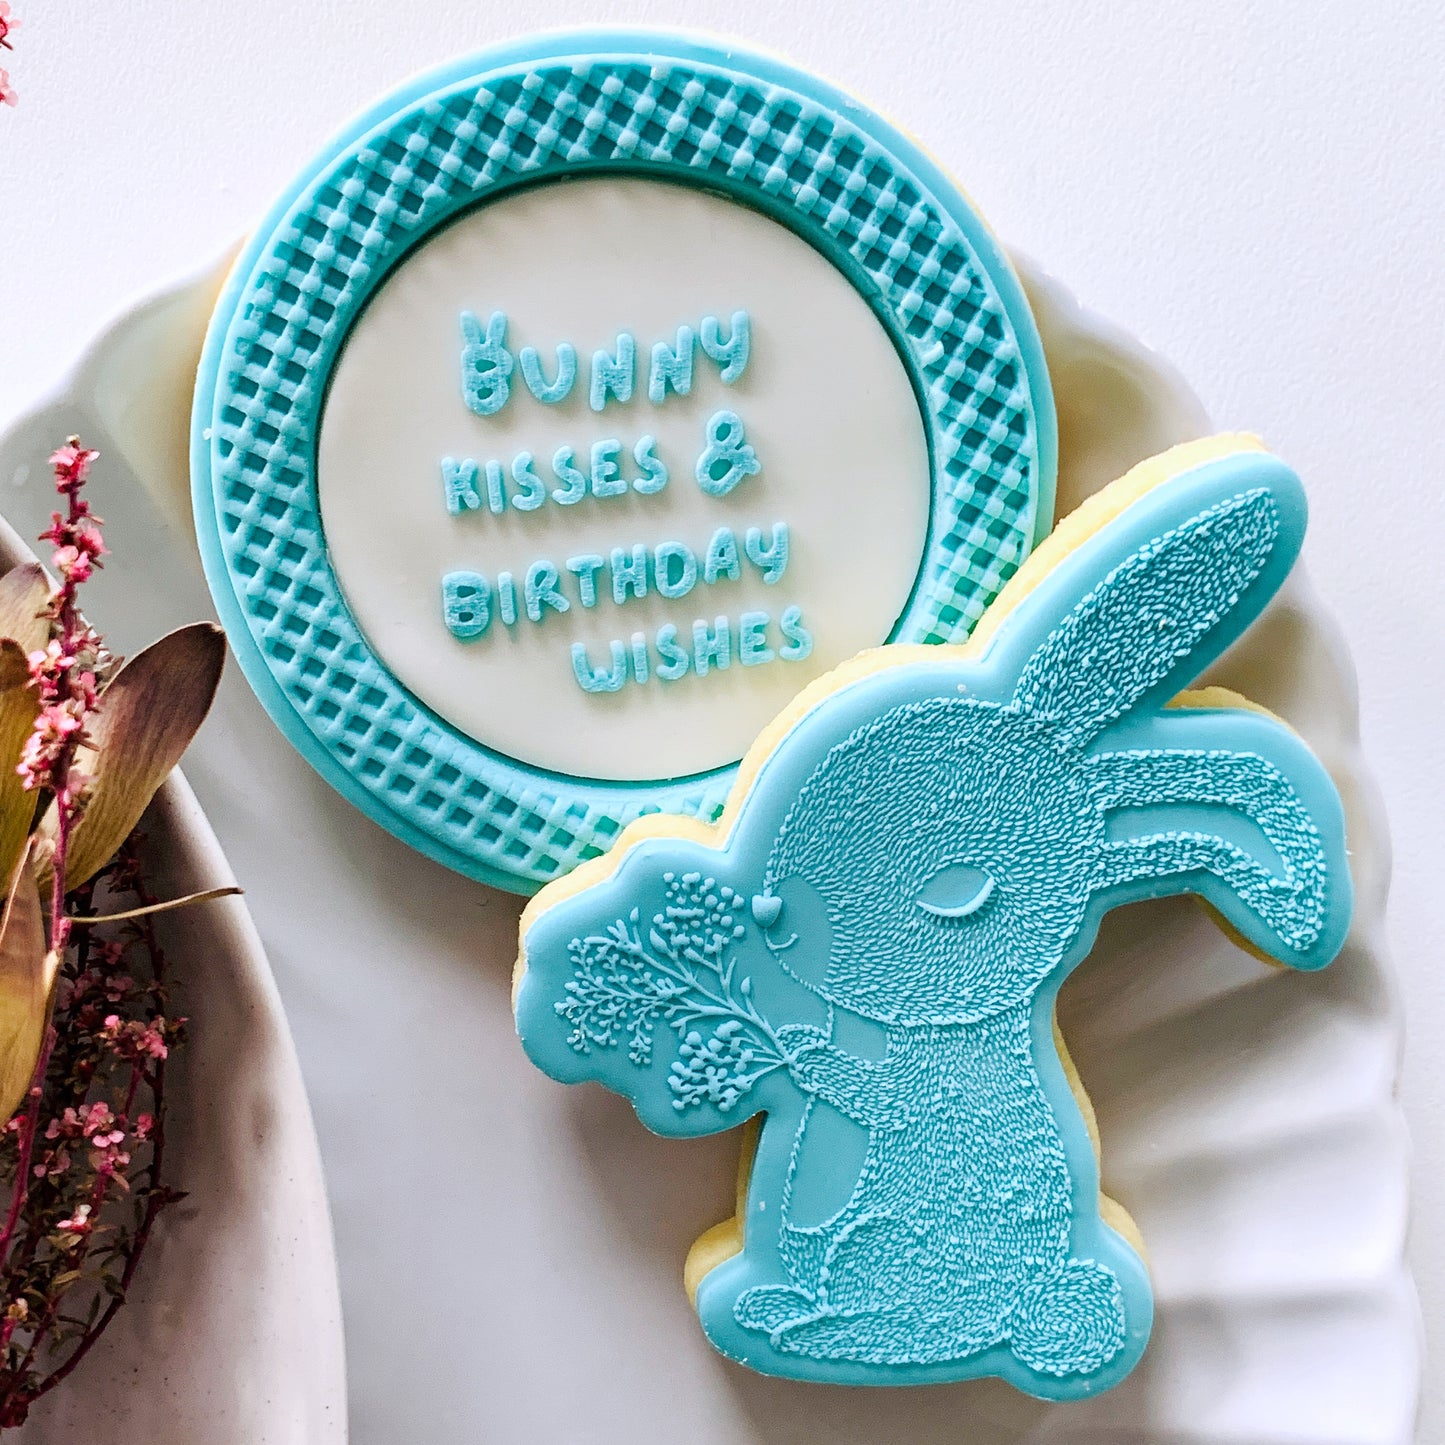 Bunny Kisses & Birthday Wishes Cookie Stamp